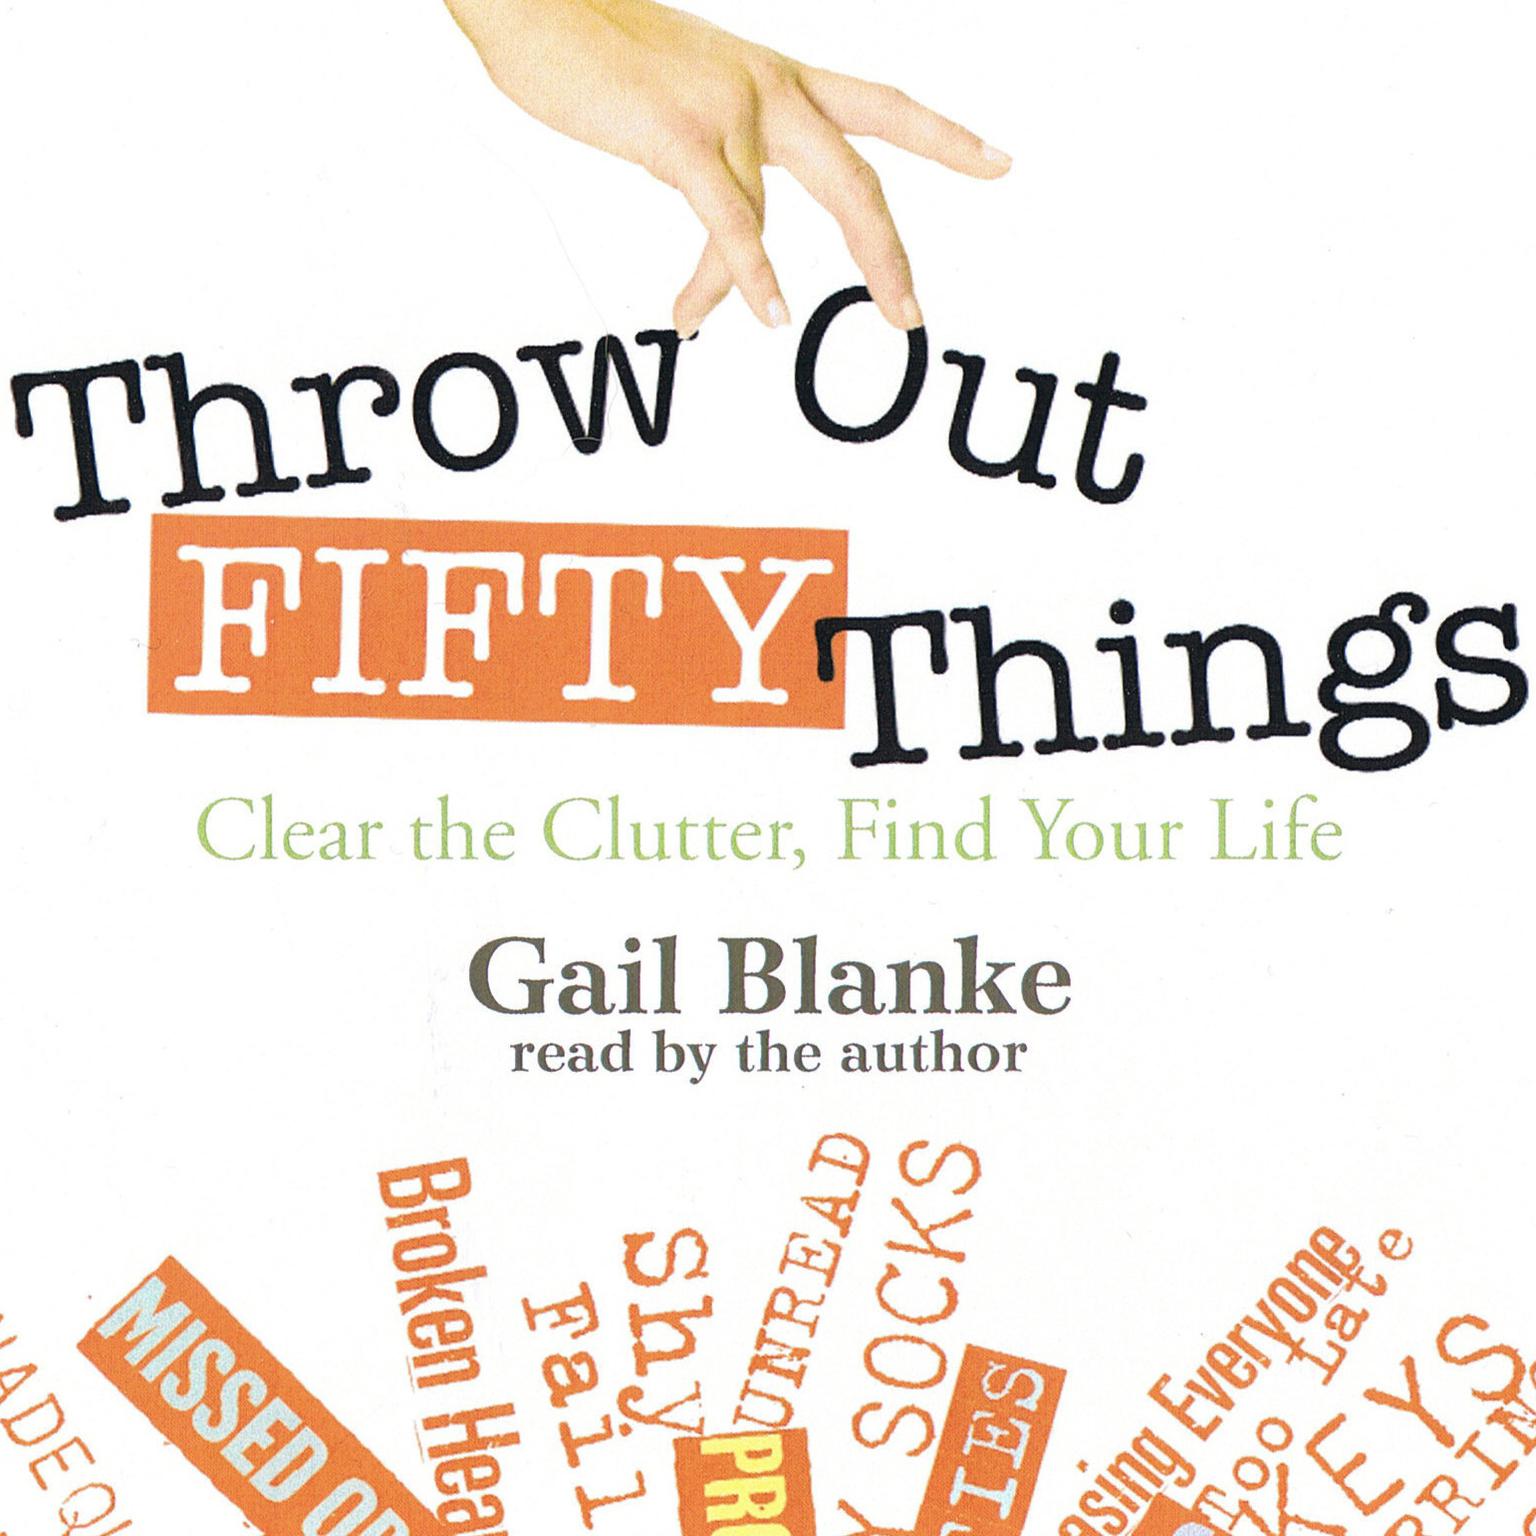 Throw Out Fifty Things (Abridged) Audiobook, by Gail Blanke